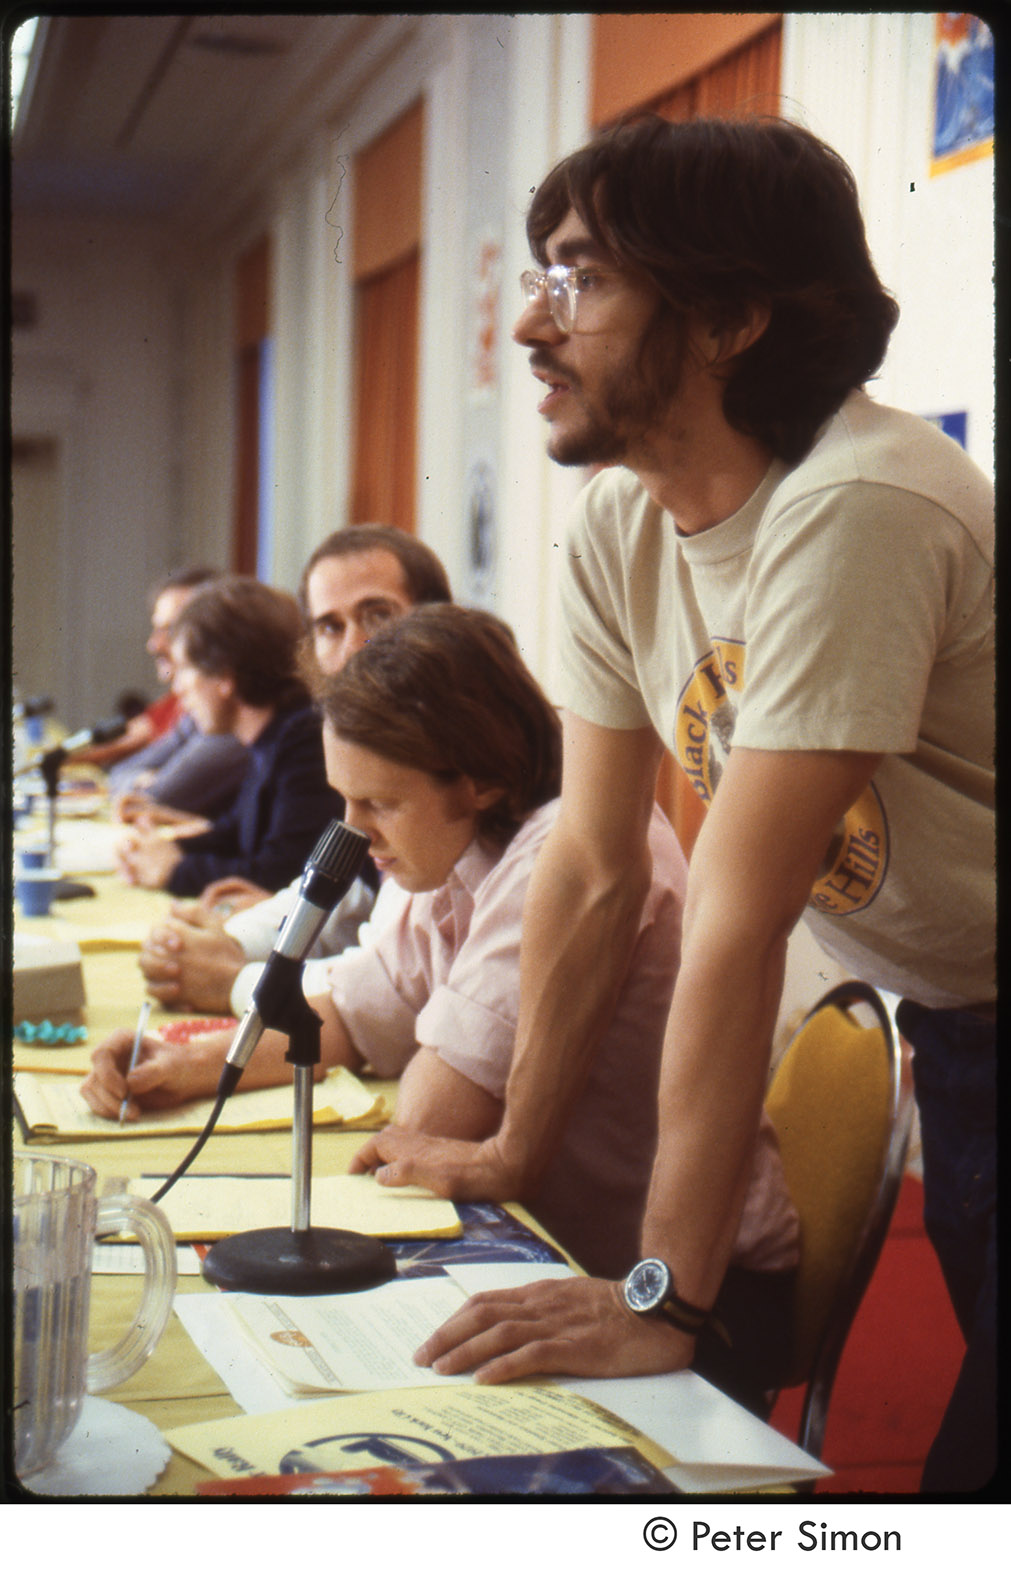 Depiction of Harvey Wasserman at MUSE press conference, 1979